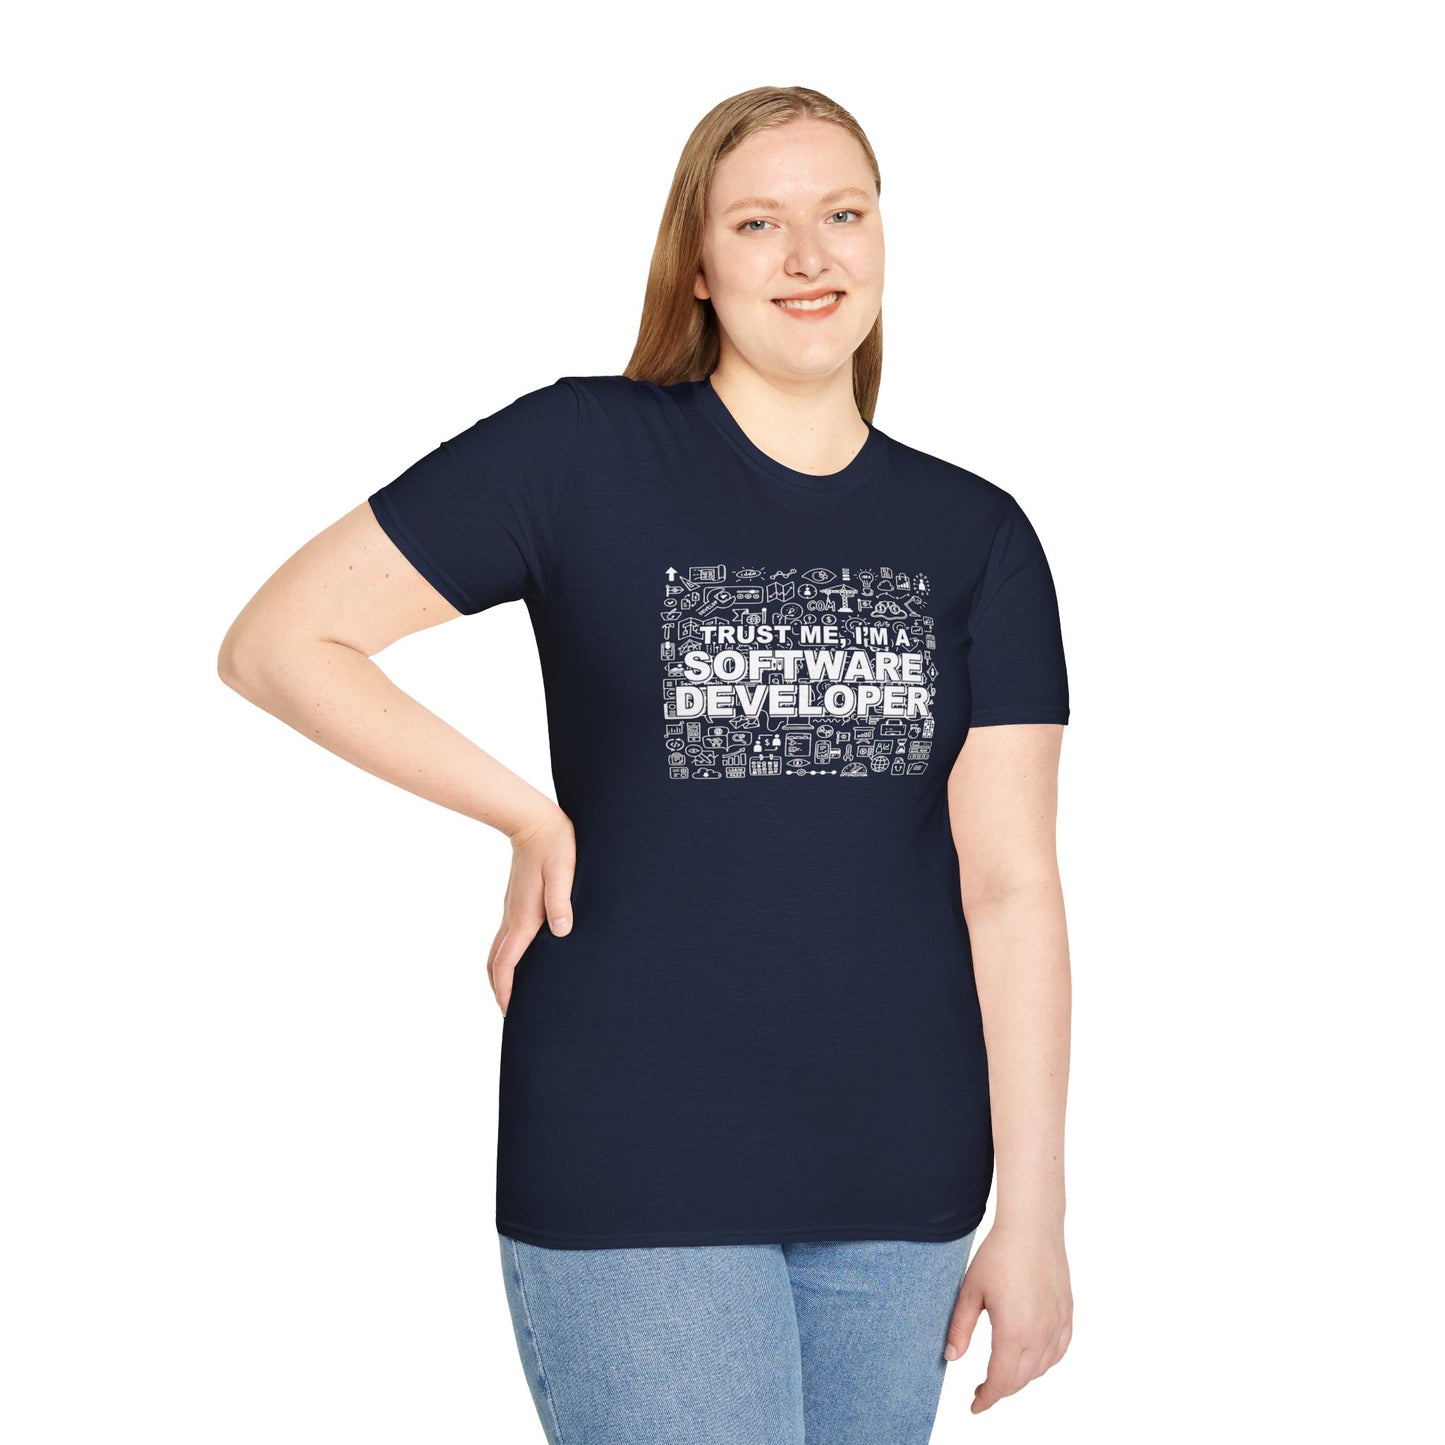 Trust Me, I'm a Software Developer T-Shirt - Elevate Your Style with Coding Confidence!